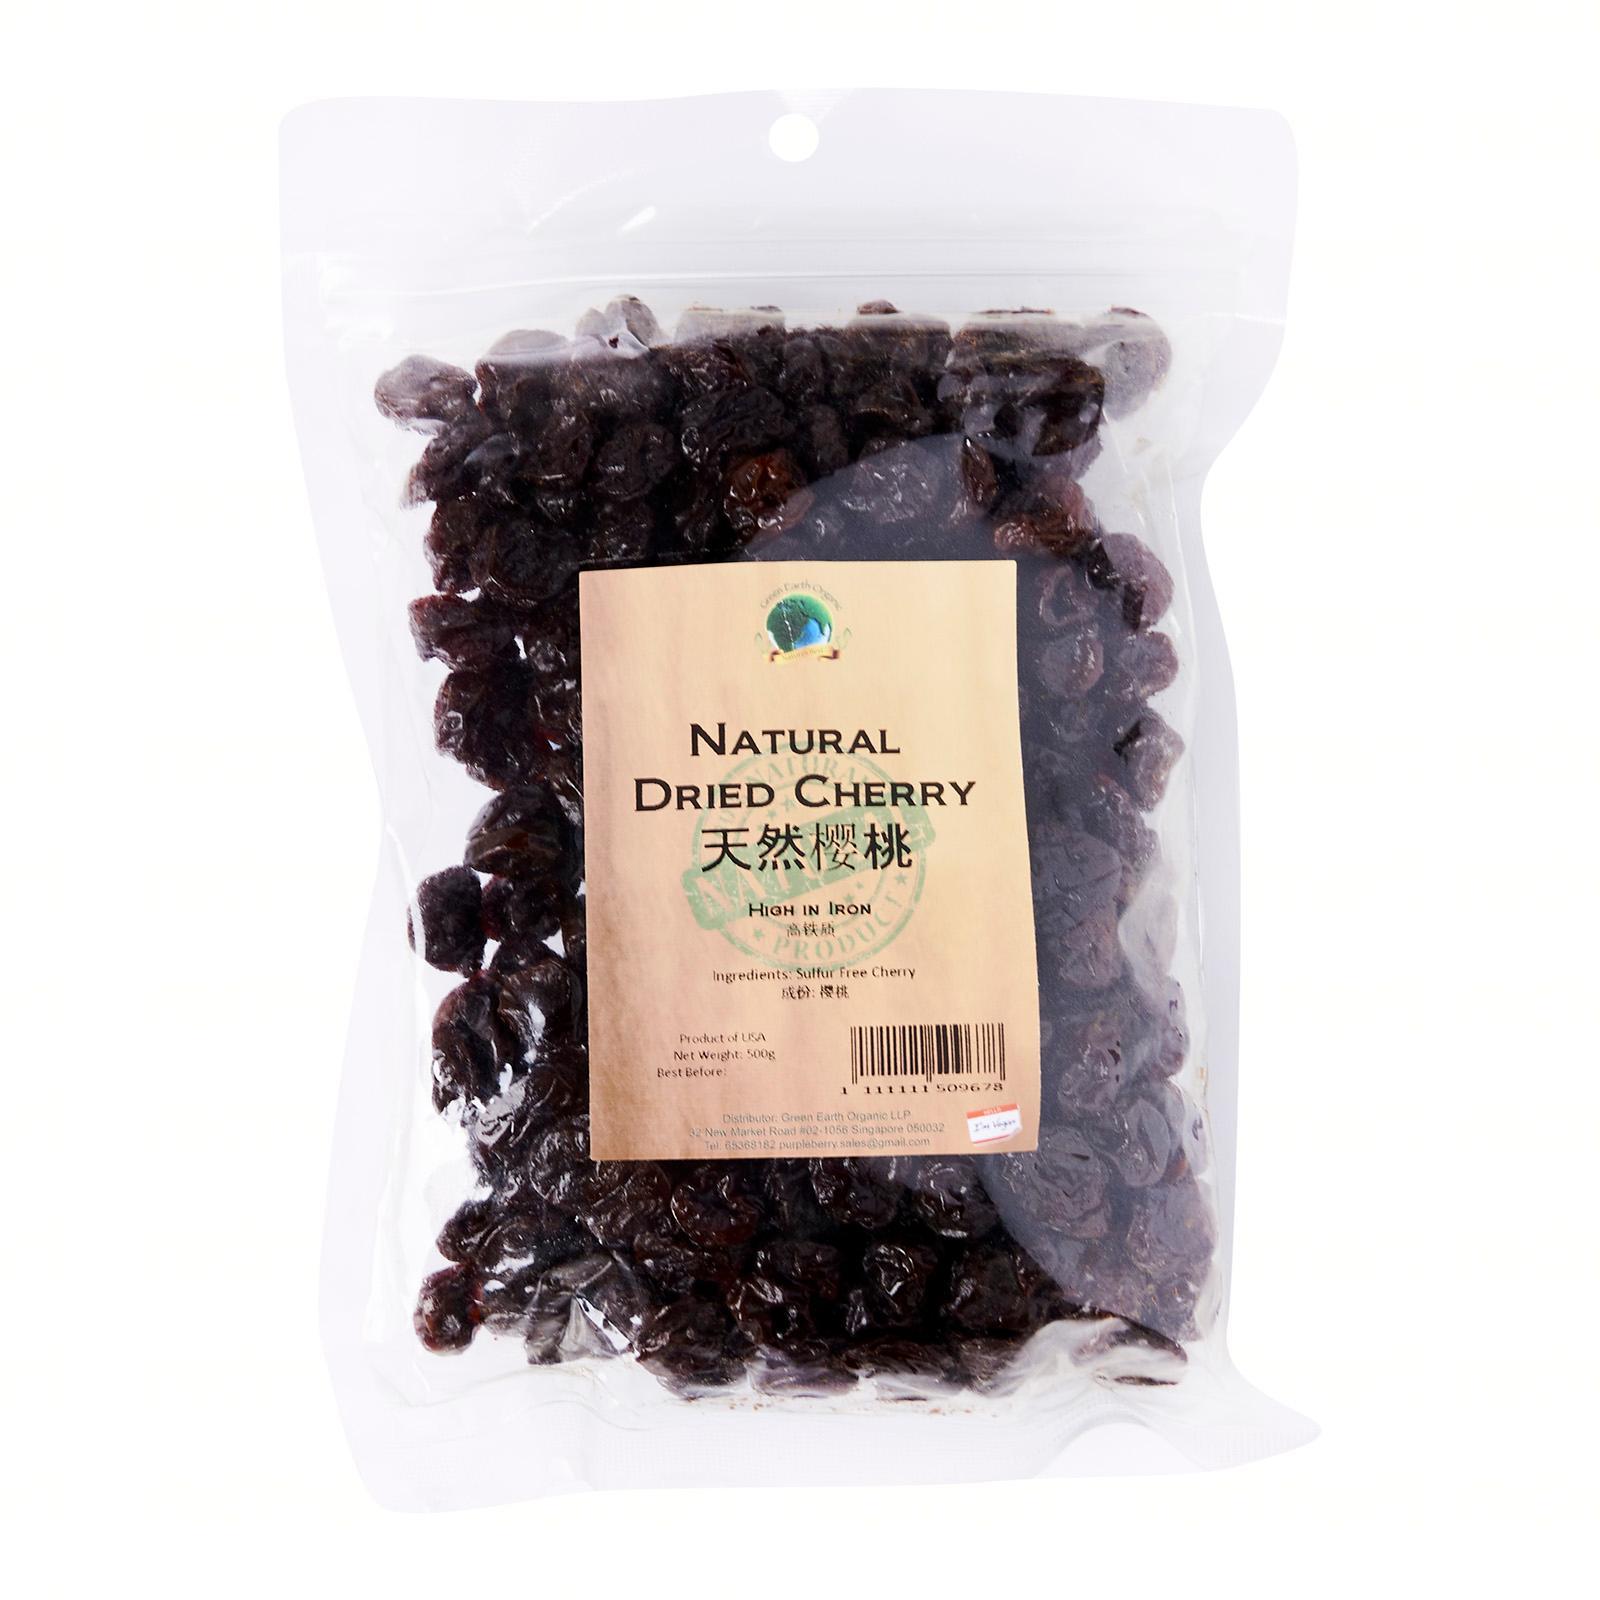 Natural Dried Cherry